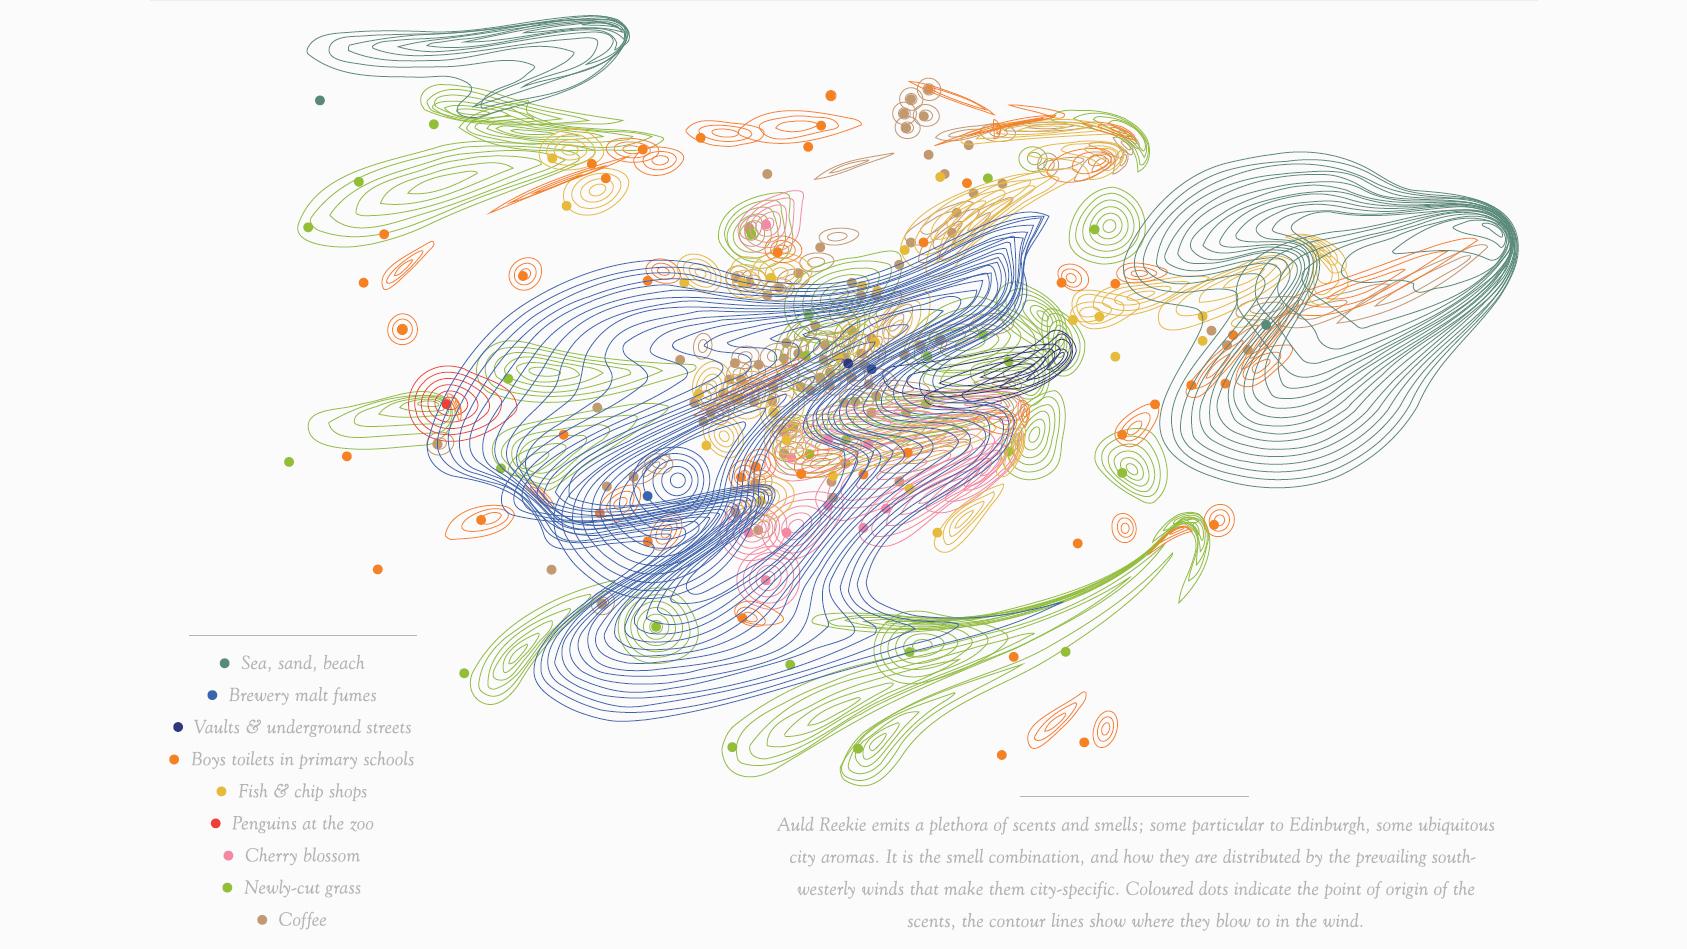 "Smells of Auld Reekie on a very breezy day in 2011" -- Kate McLean's smell map of Edinburgh.